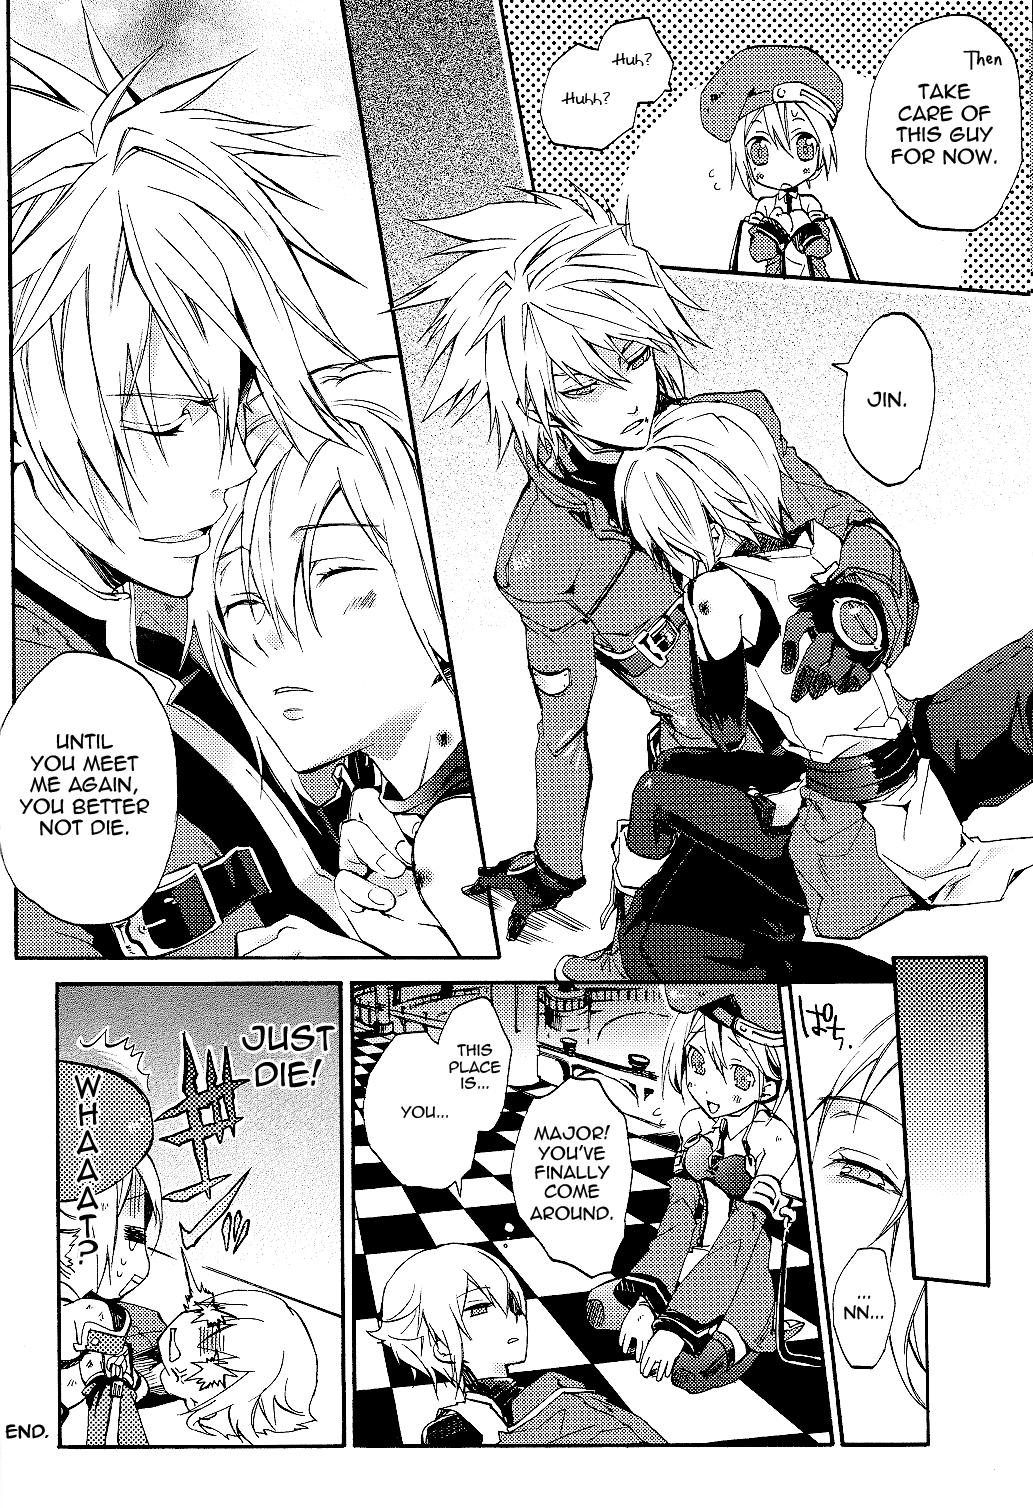 Fingering Ore no Yandere Otouto ga Konna ni Kawaii Wake ga Nai | My Yandere Little Brother Can’t Be This Cute - Blazblue Eating Pussy - Page 20